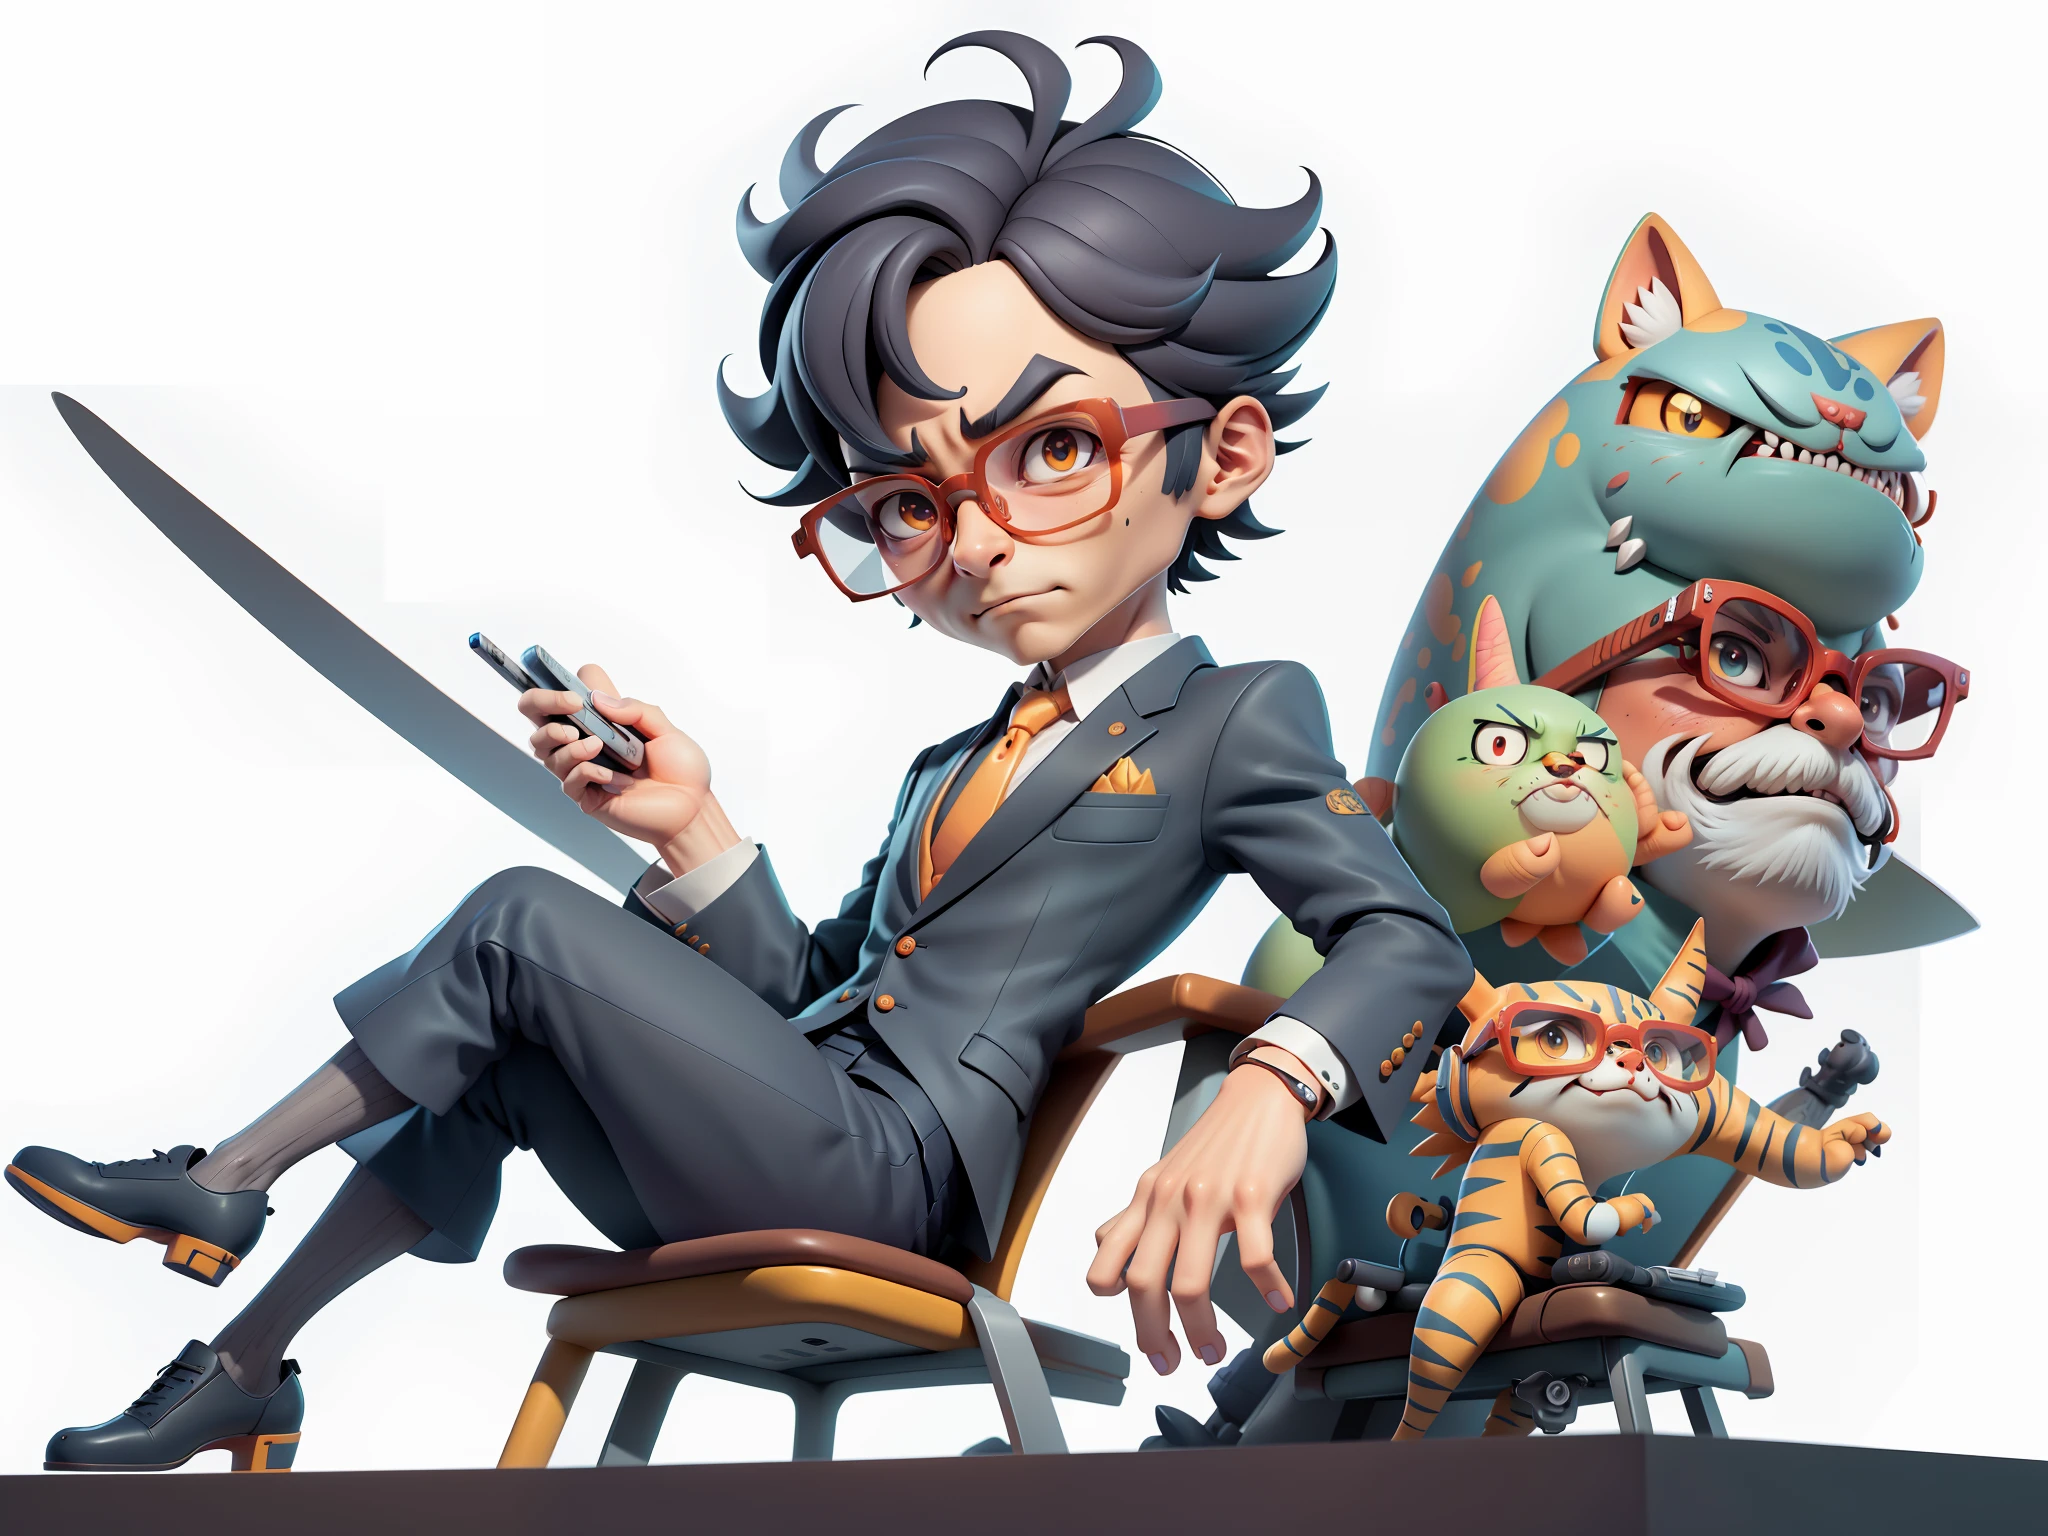 A young man in a suit, Short hair and glasses sat at his desk，holding laptop，digitial painting，tigre，3D character design by Mark Clairen and Pixar and Hayao Miyazaki and Akira Toriyama，4K HD illustration，Very detailed facial features and cartoon-style visuals。